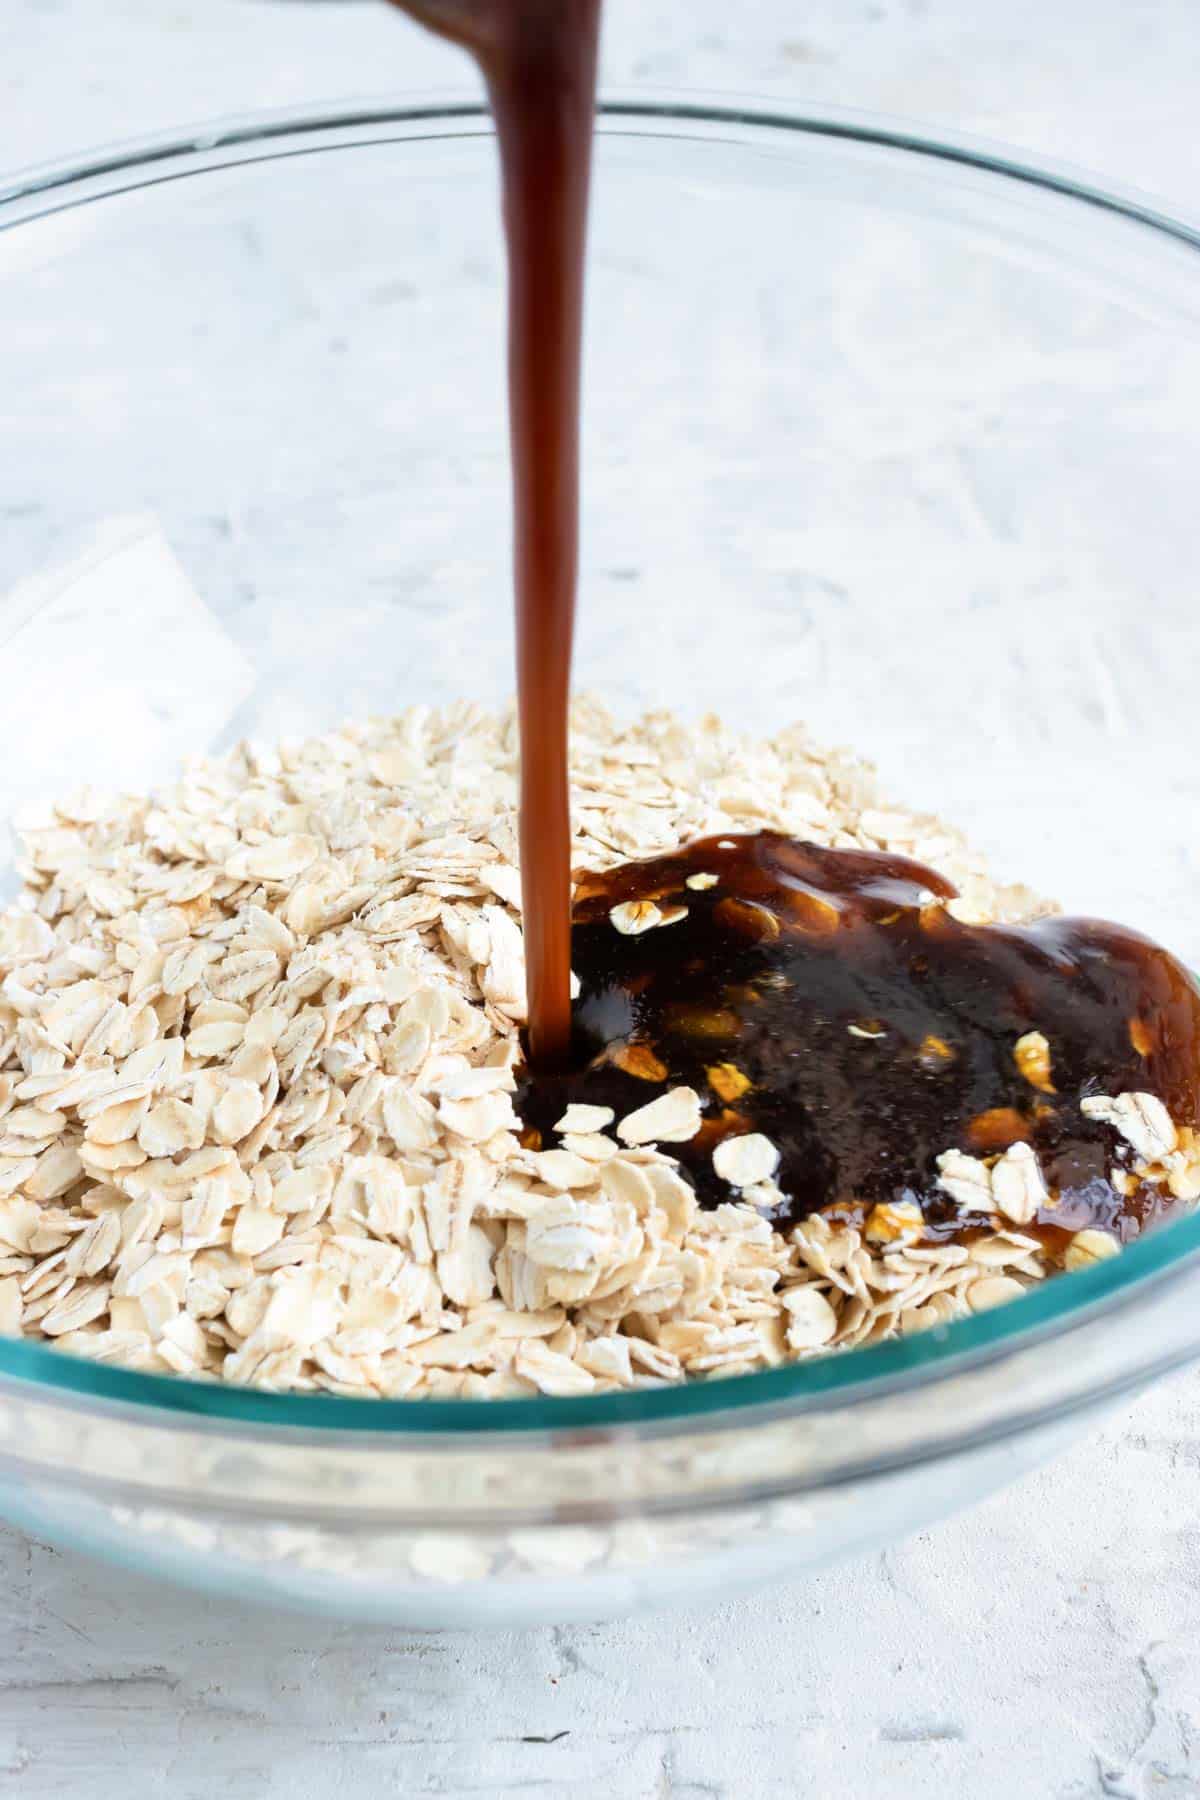 The maple syrup base is poured over gluten-free oats.